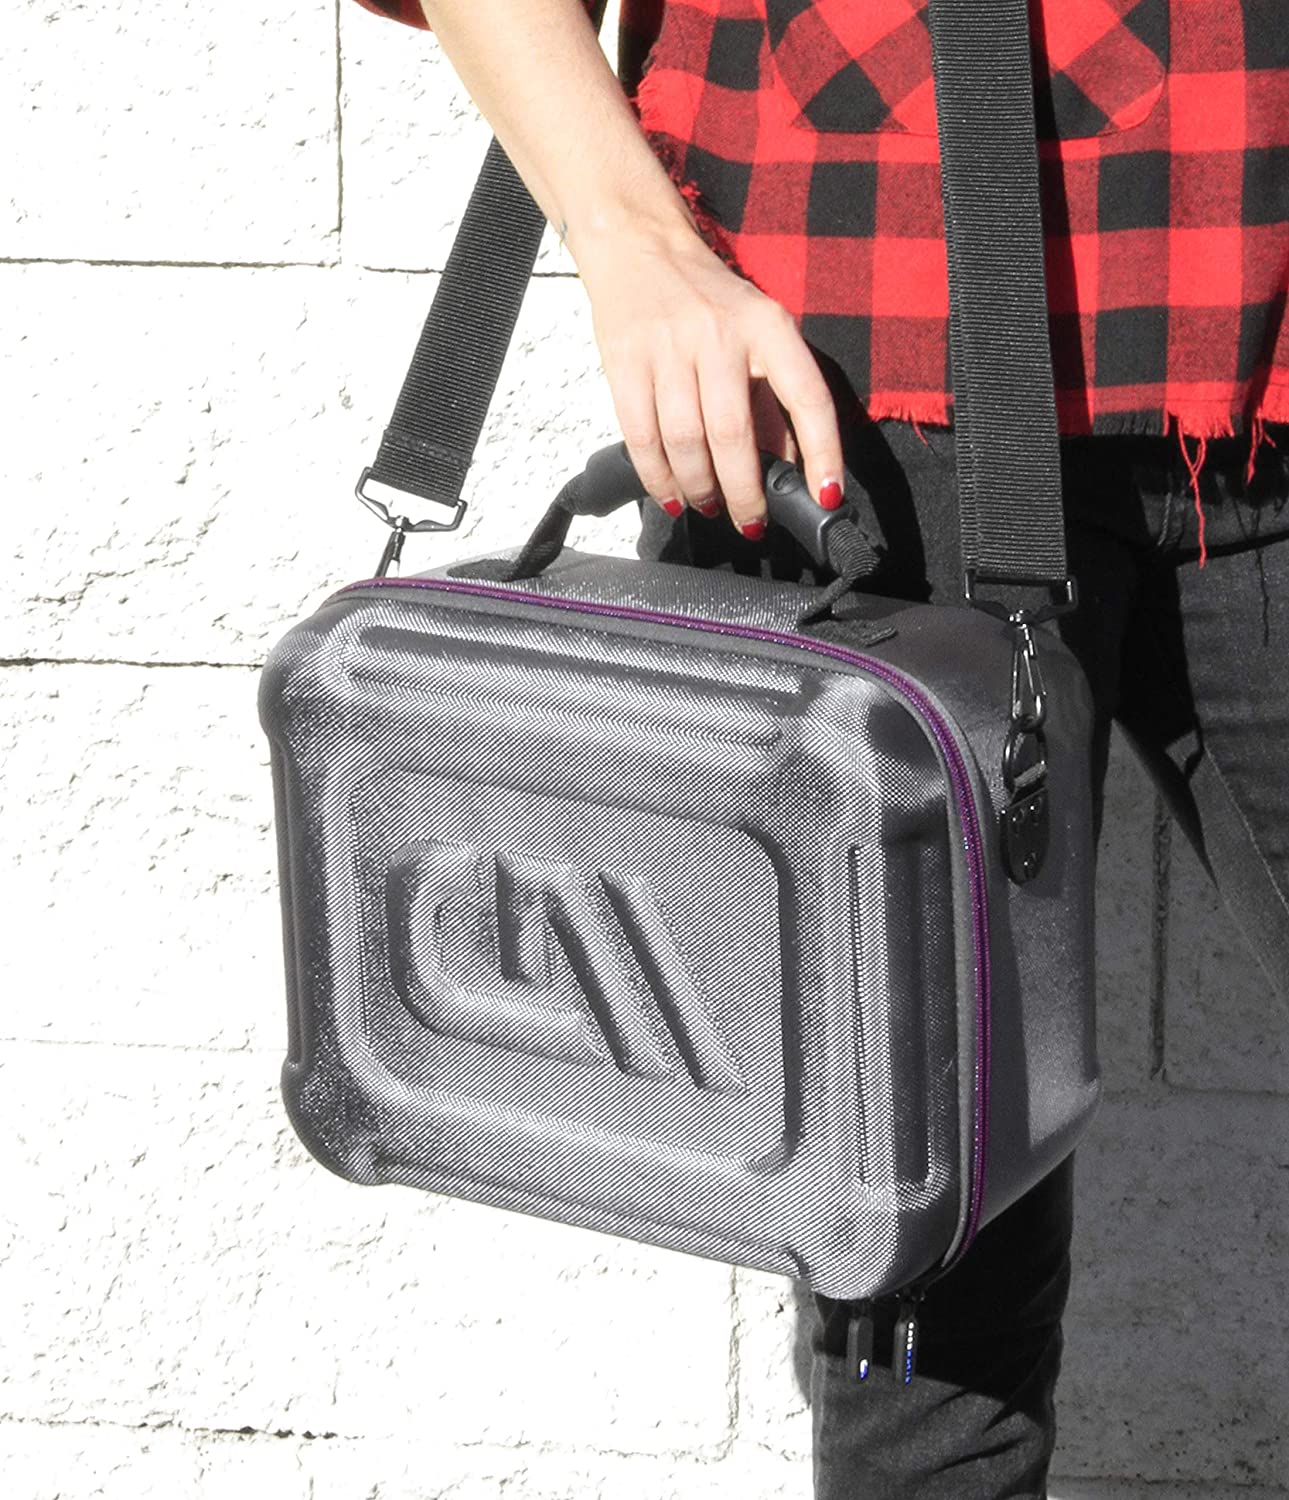 Ynpuz Carrying Case for Portable Nebulizer (Case Only)